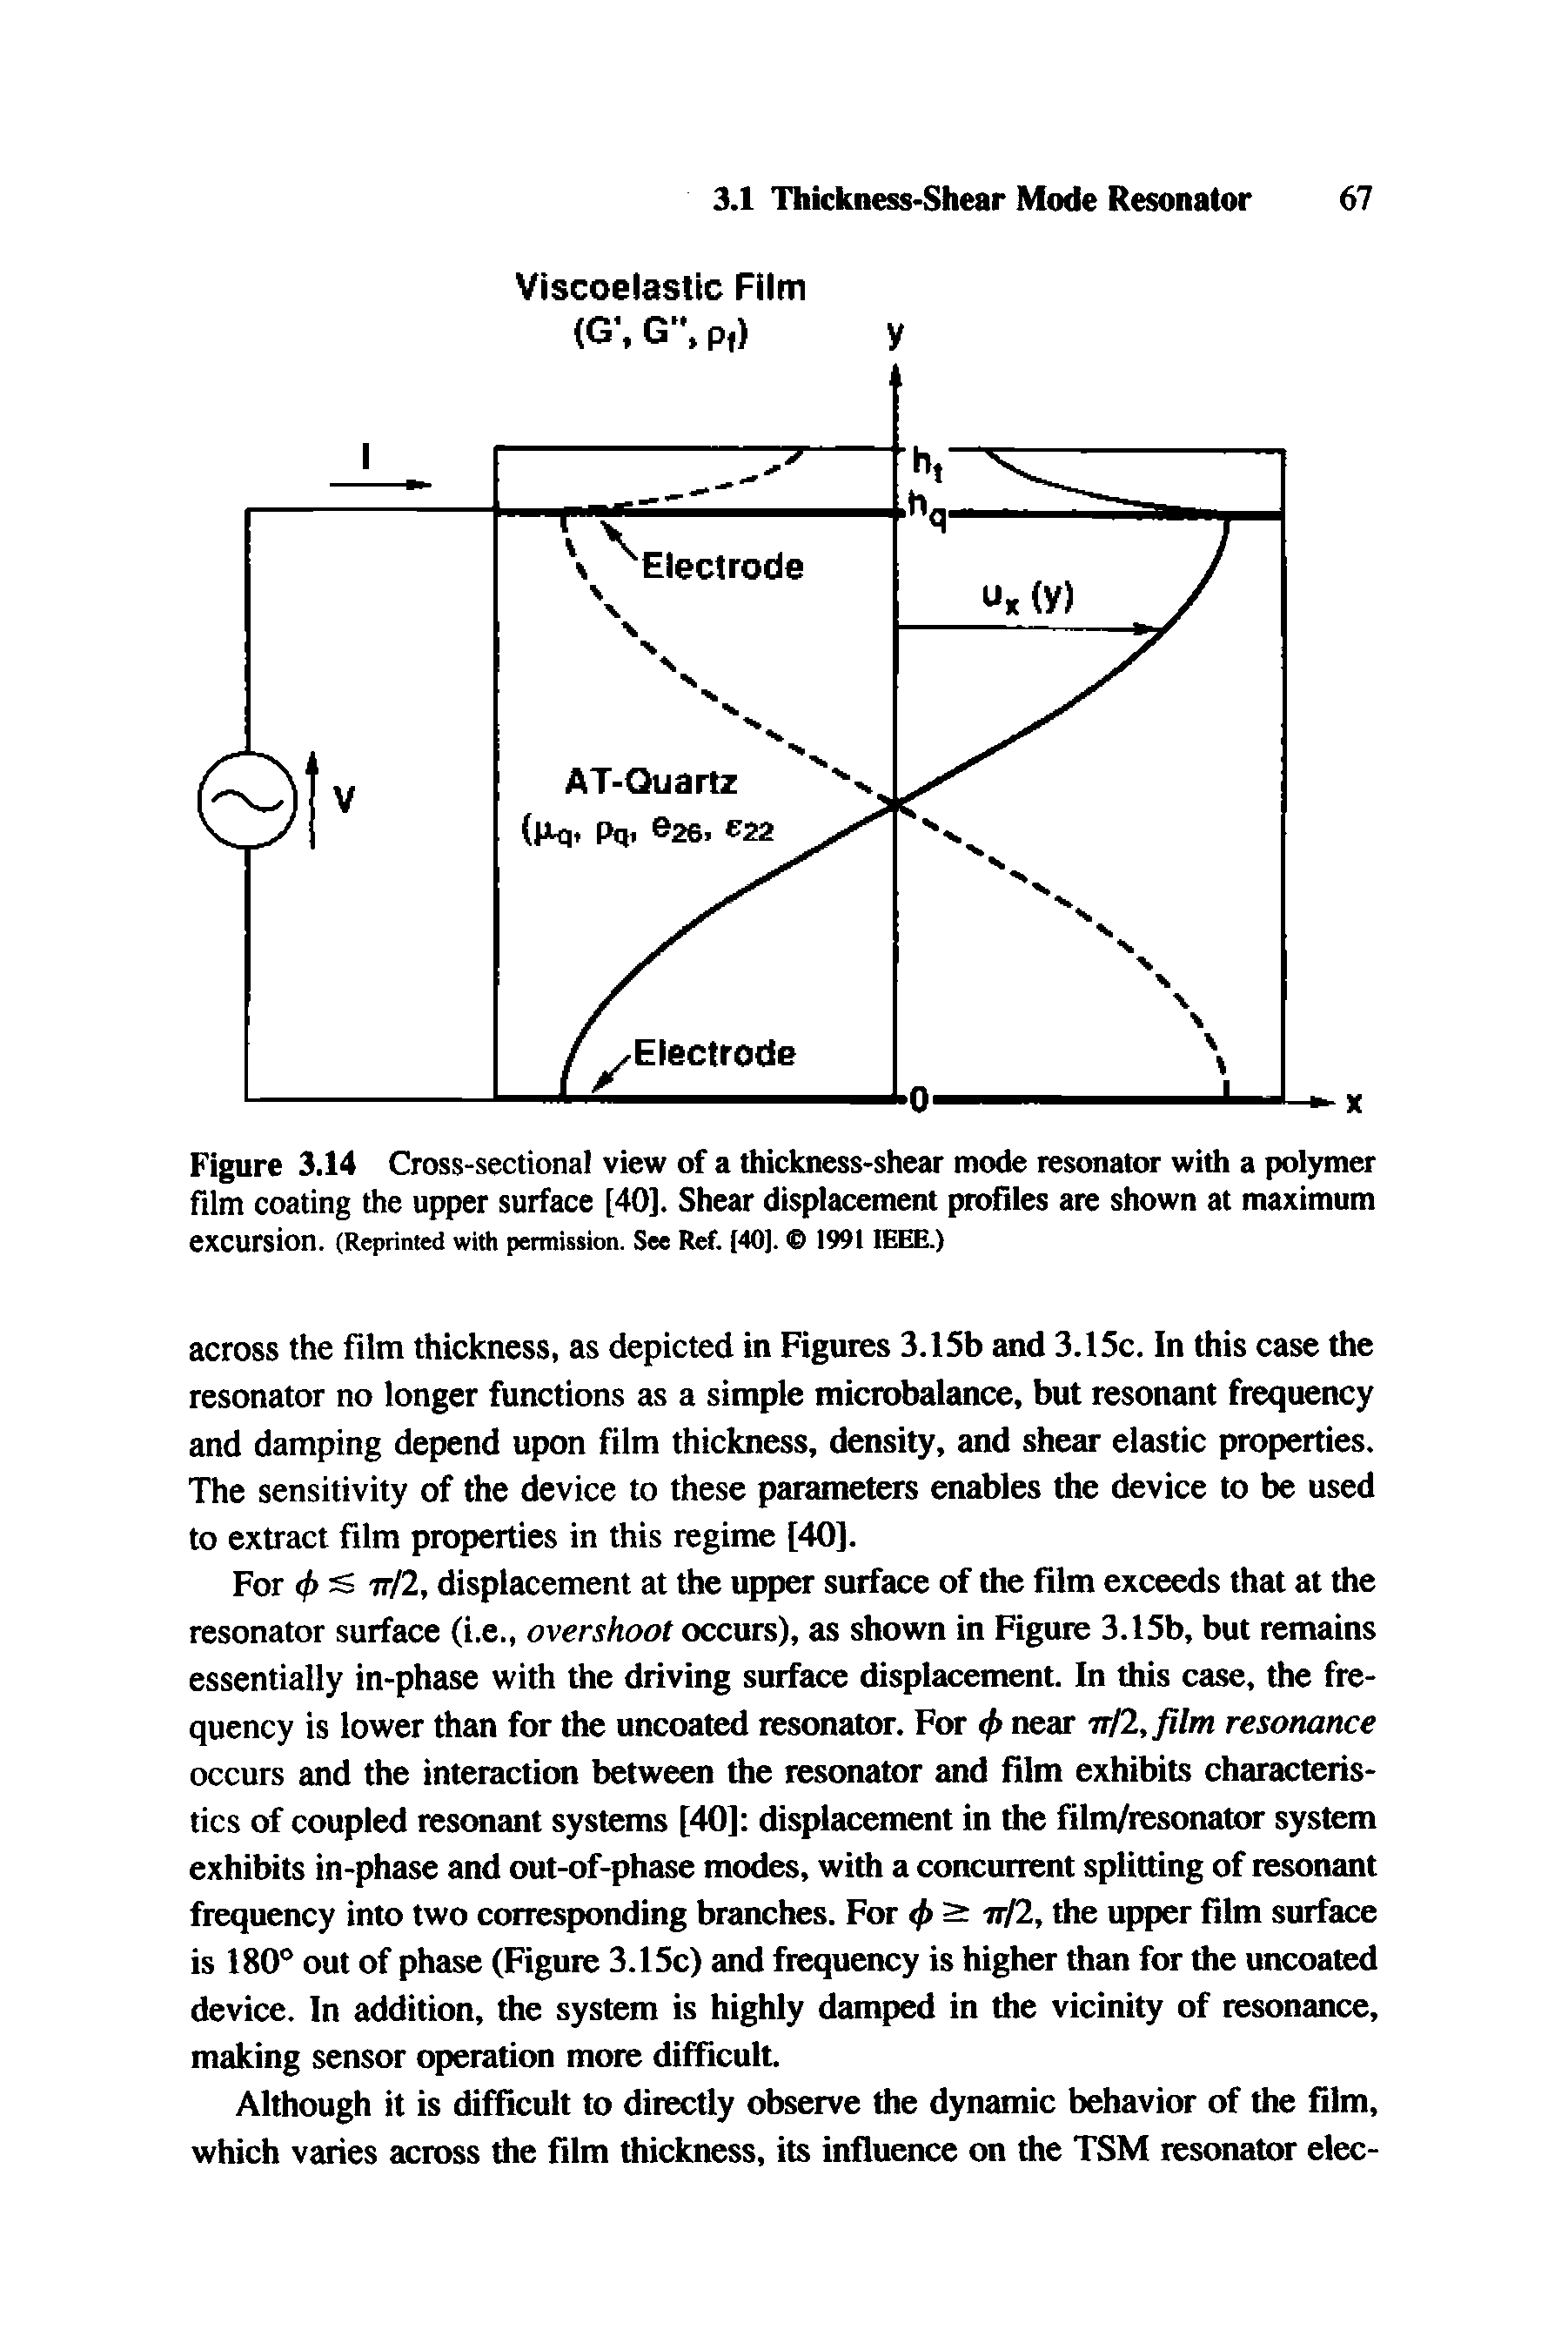 Figure 3.14 Cross-sectional view of a thickness-shear mode resonator with a polymer film coating the upper surface [40]. Shear displacement profiles are shown at maximum excursion. (Reprinted with permission. See Ref. 140]. > 1991 IEEE.)...